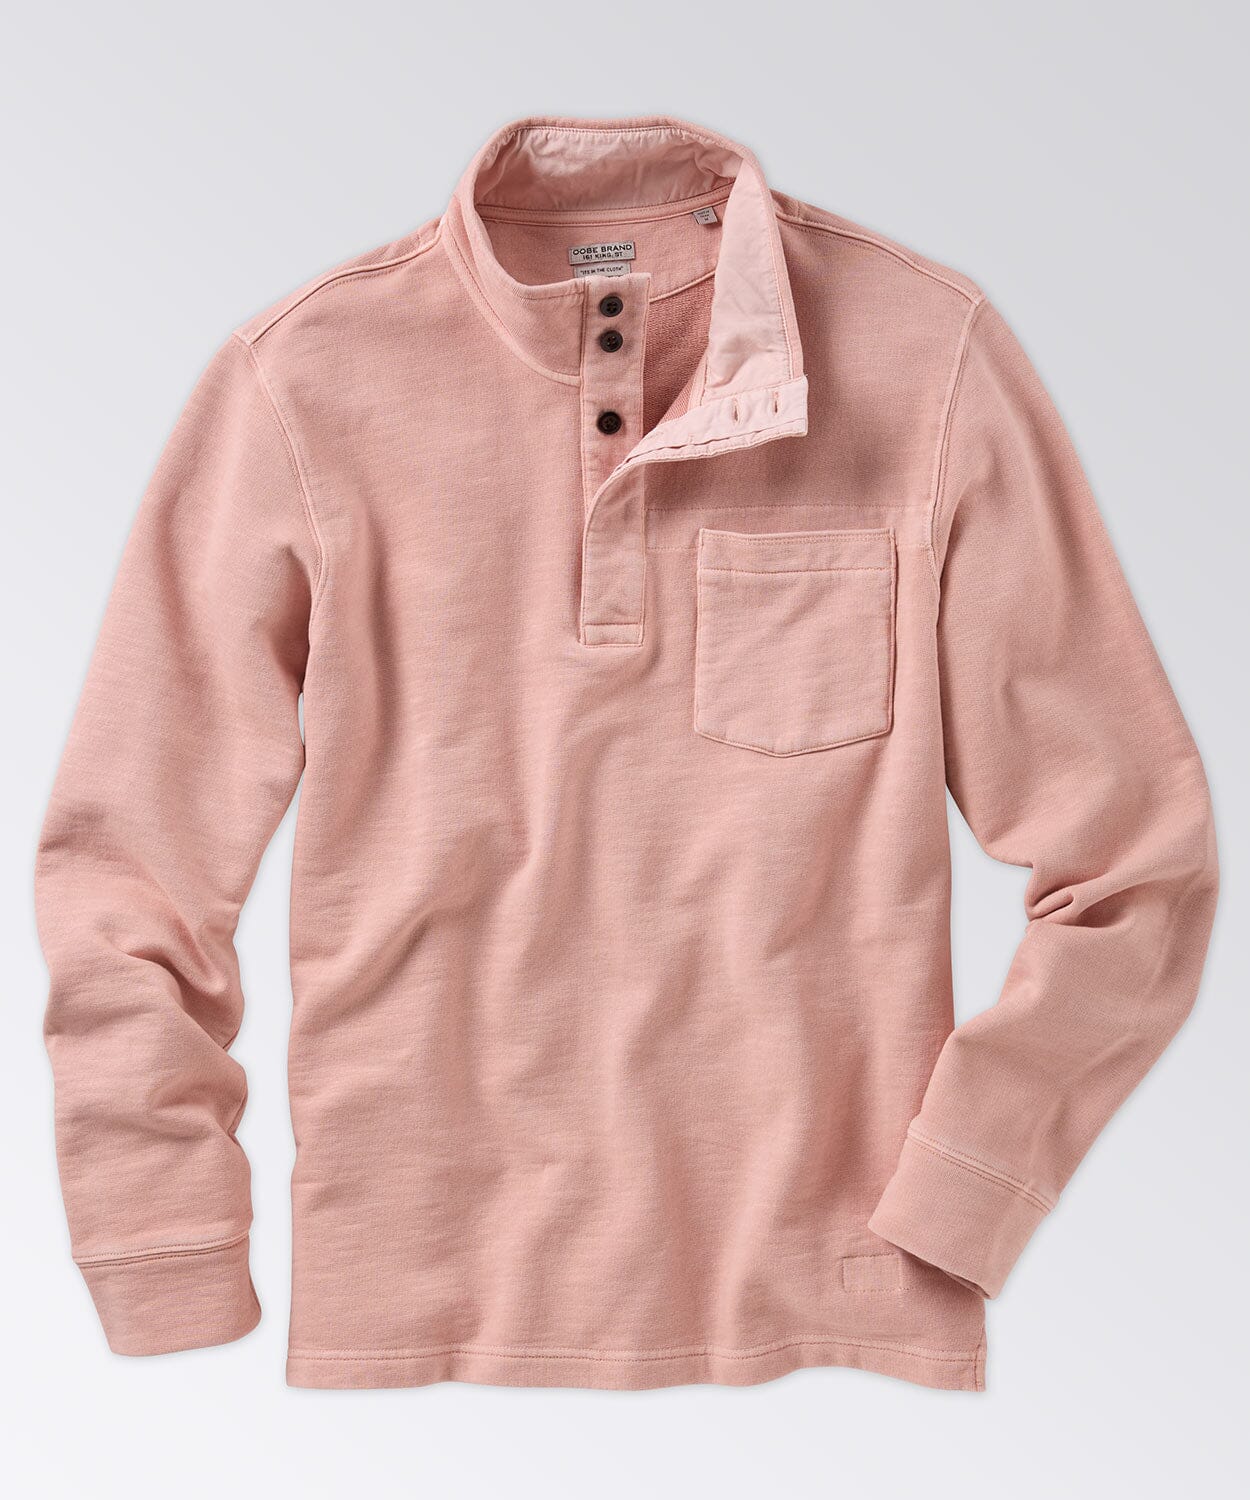 mens knit pullover with pocket